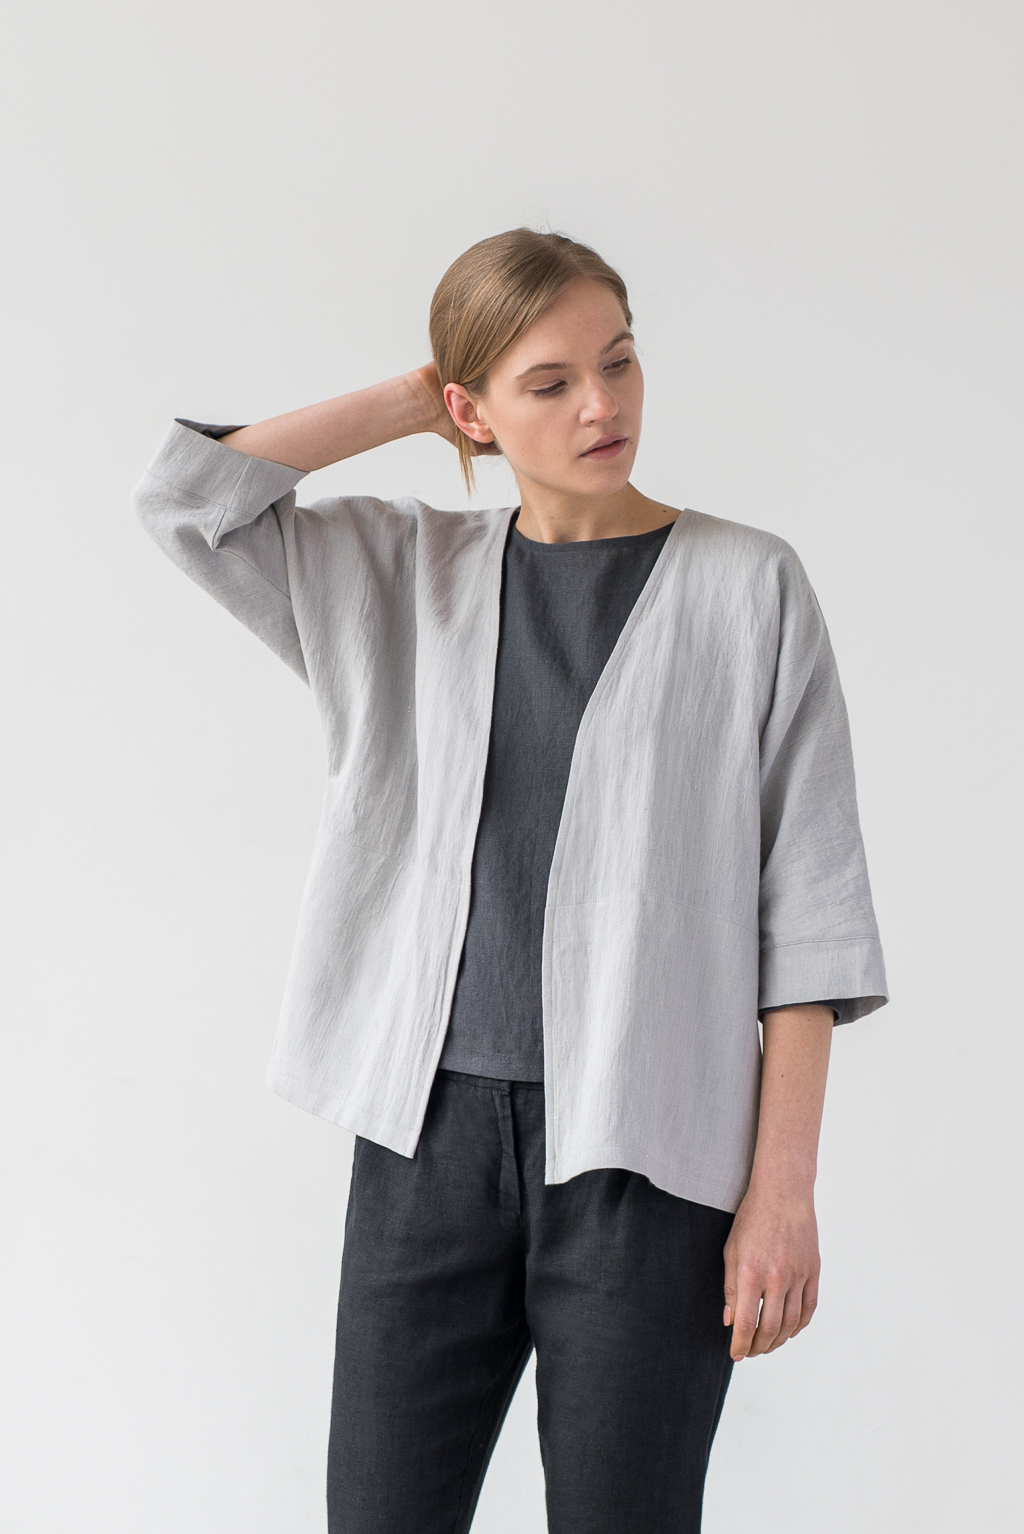 Ode to Sunday – Simple Linen Clothing